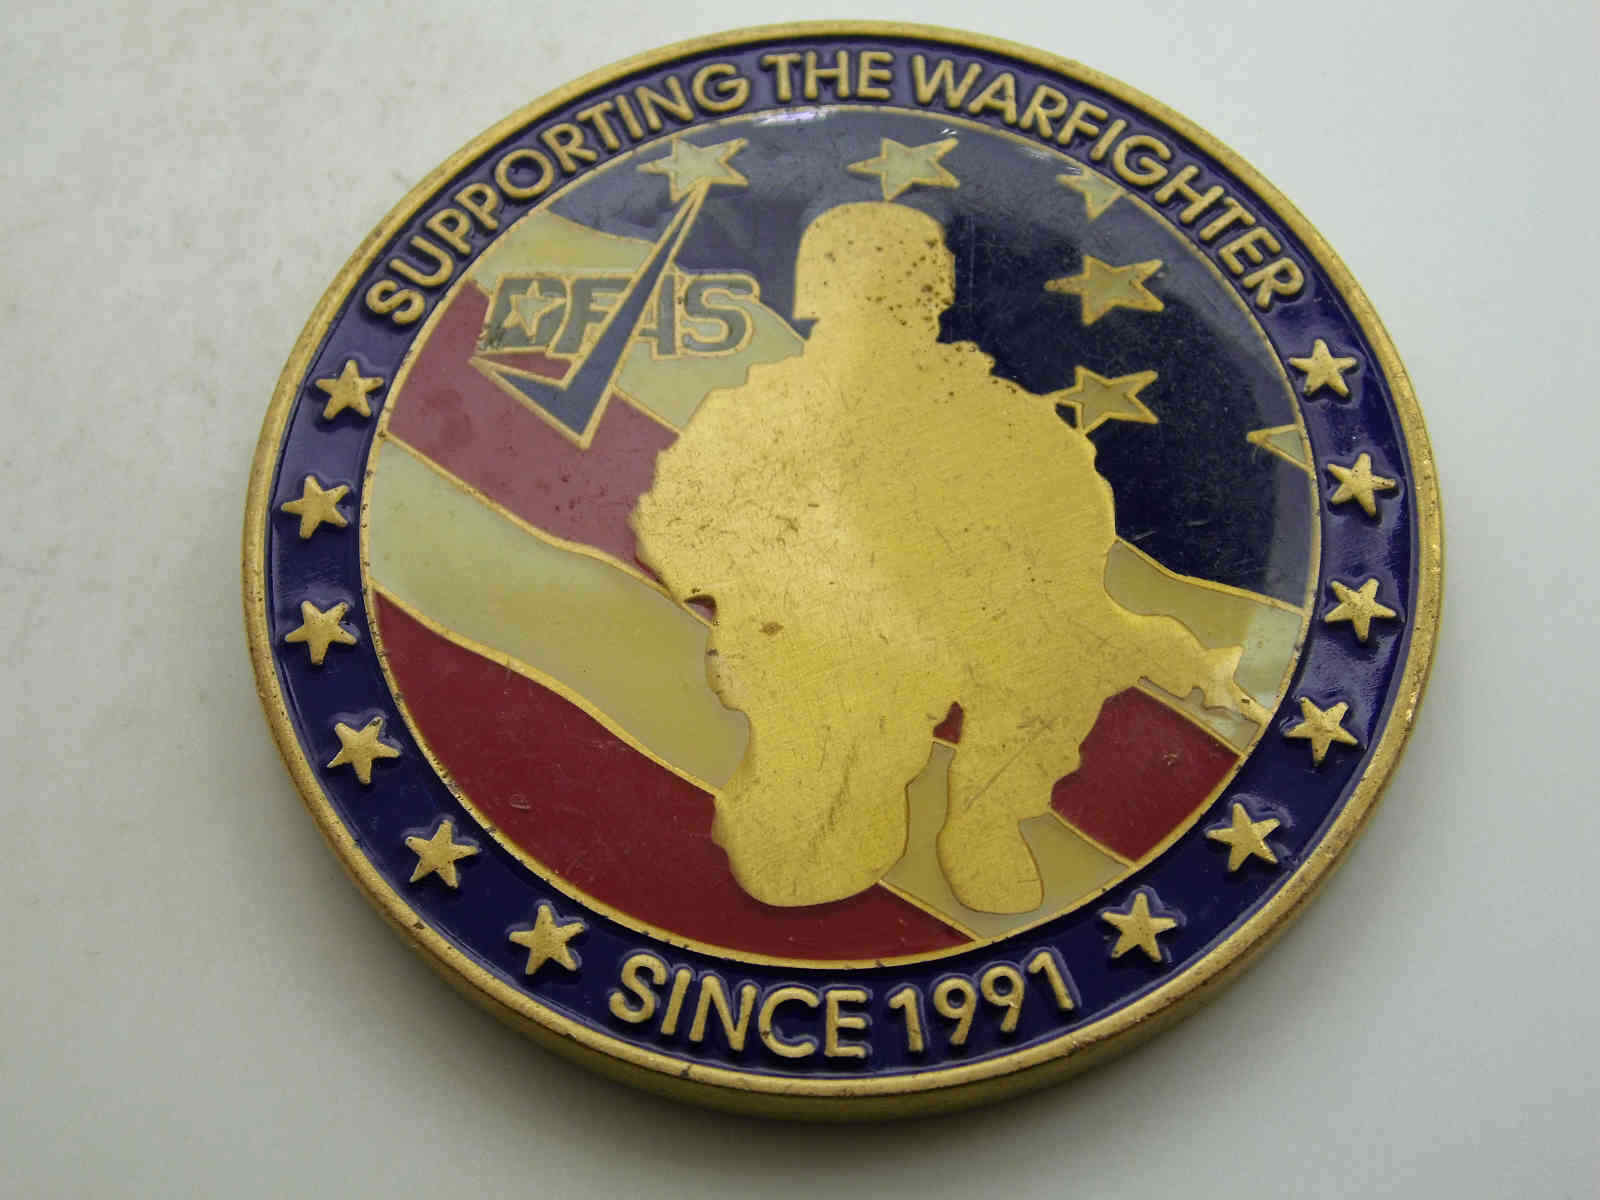 DEFENSE FINANCE AND ACCOUNTING SERVICE SUPPORTING THE WARFIGHTER CHALLENGE COIN